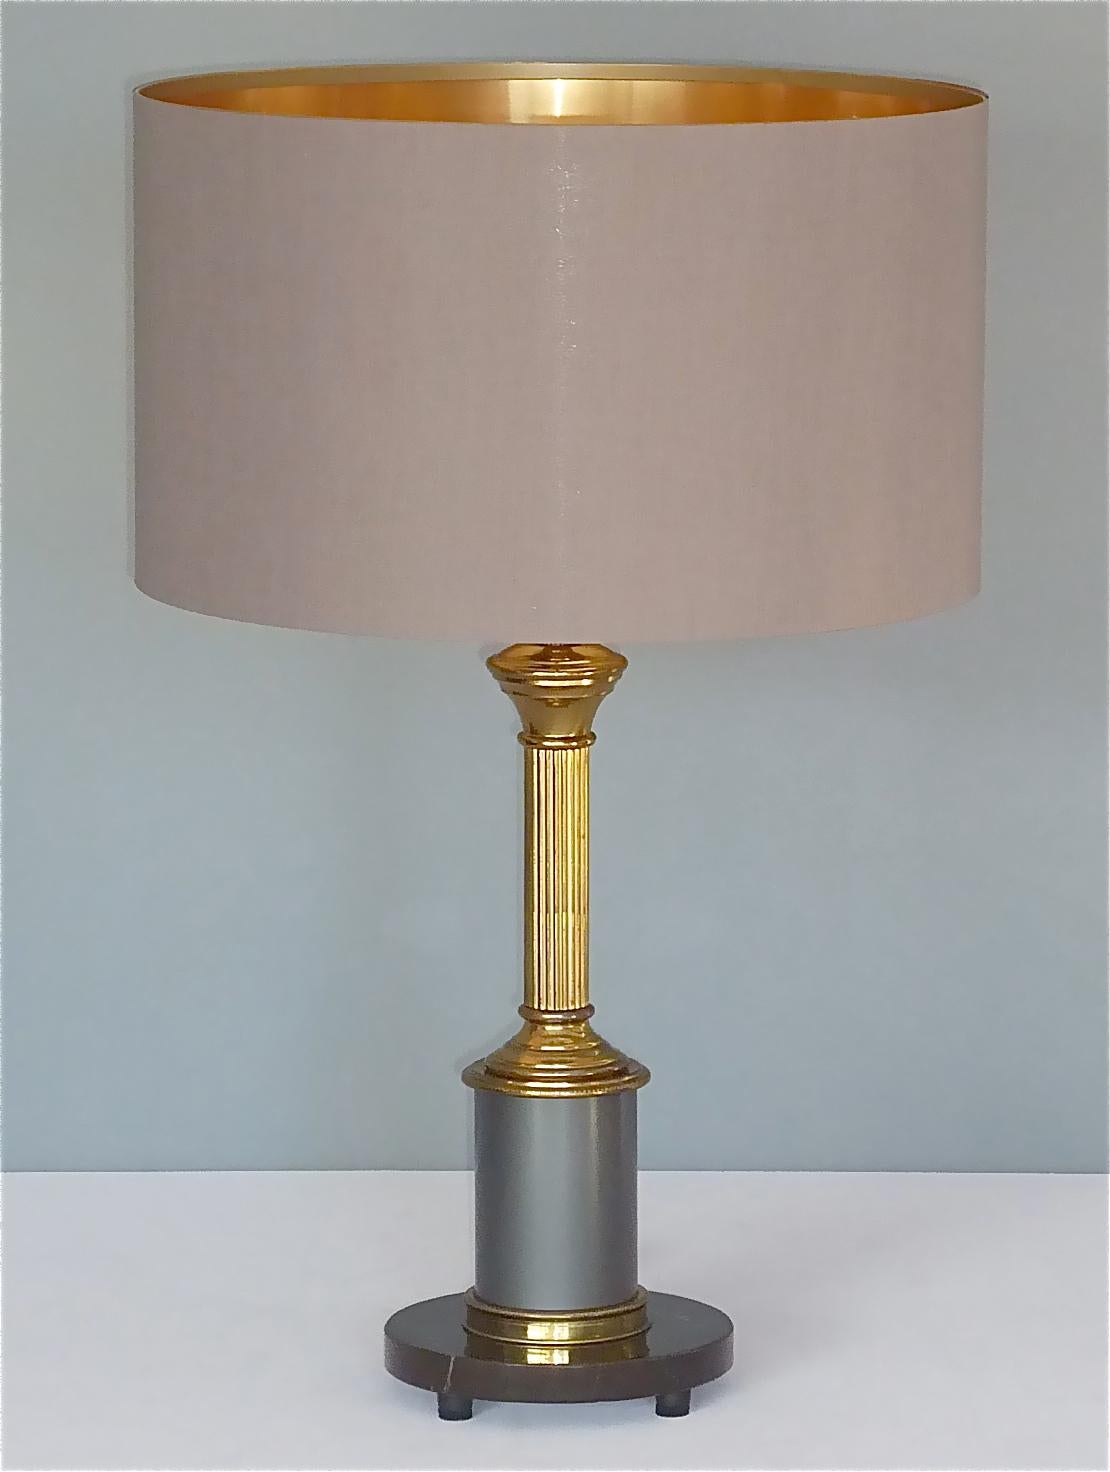 Mid-Century Modern Classical French Maison Jansen Table Lamp Marble Gunmetal Brass, 1950s, Charles For Sale